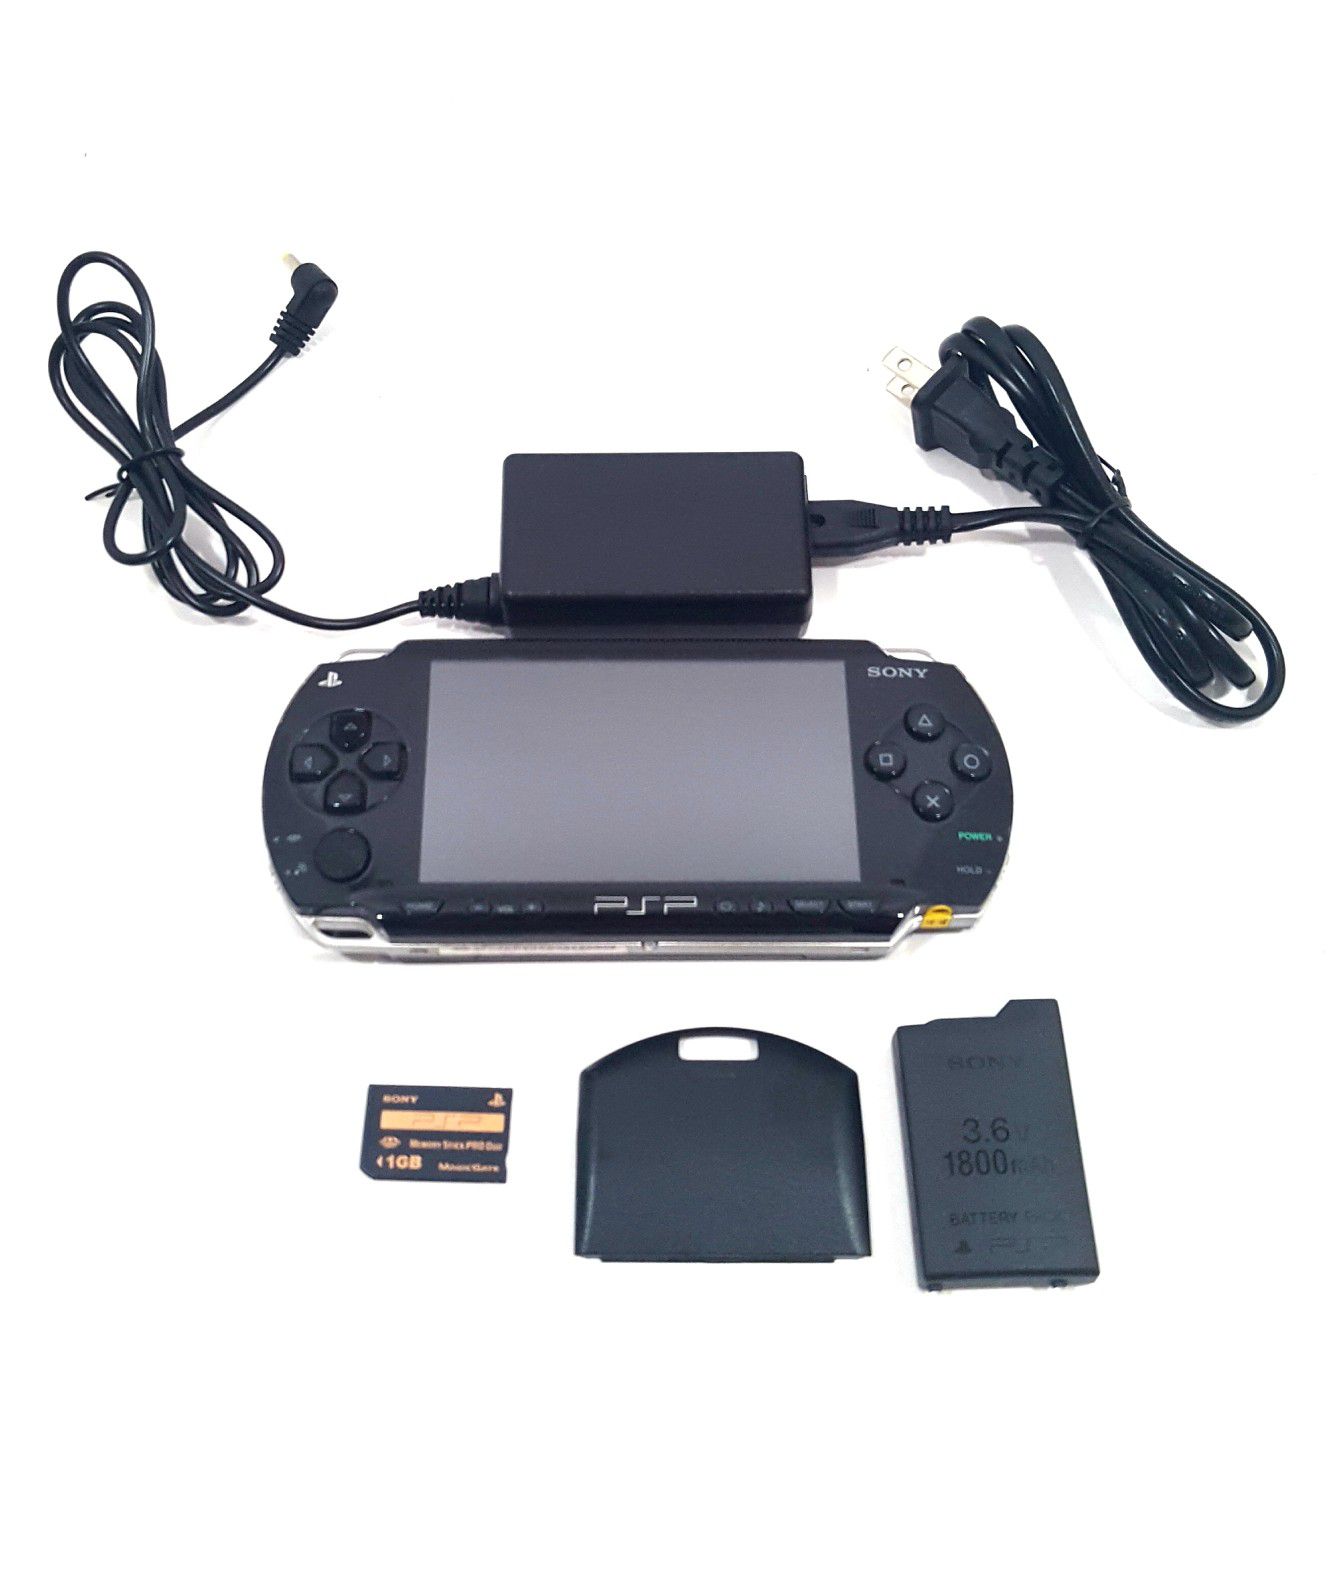 Sony Black PSP 1000 With AC Adapter